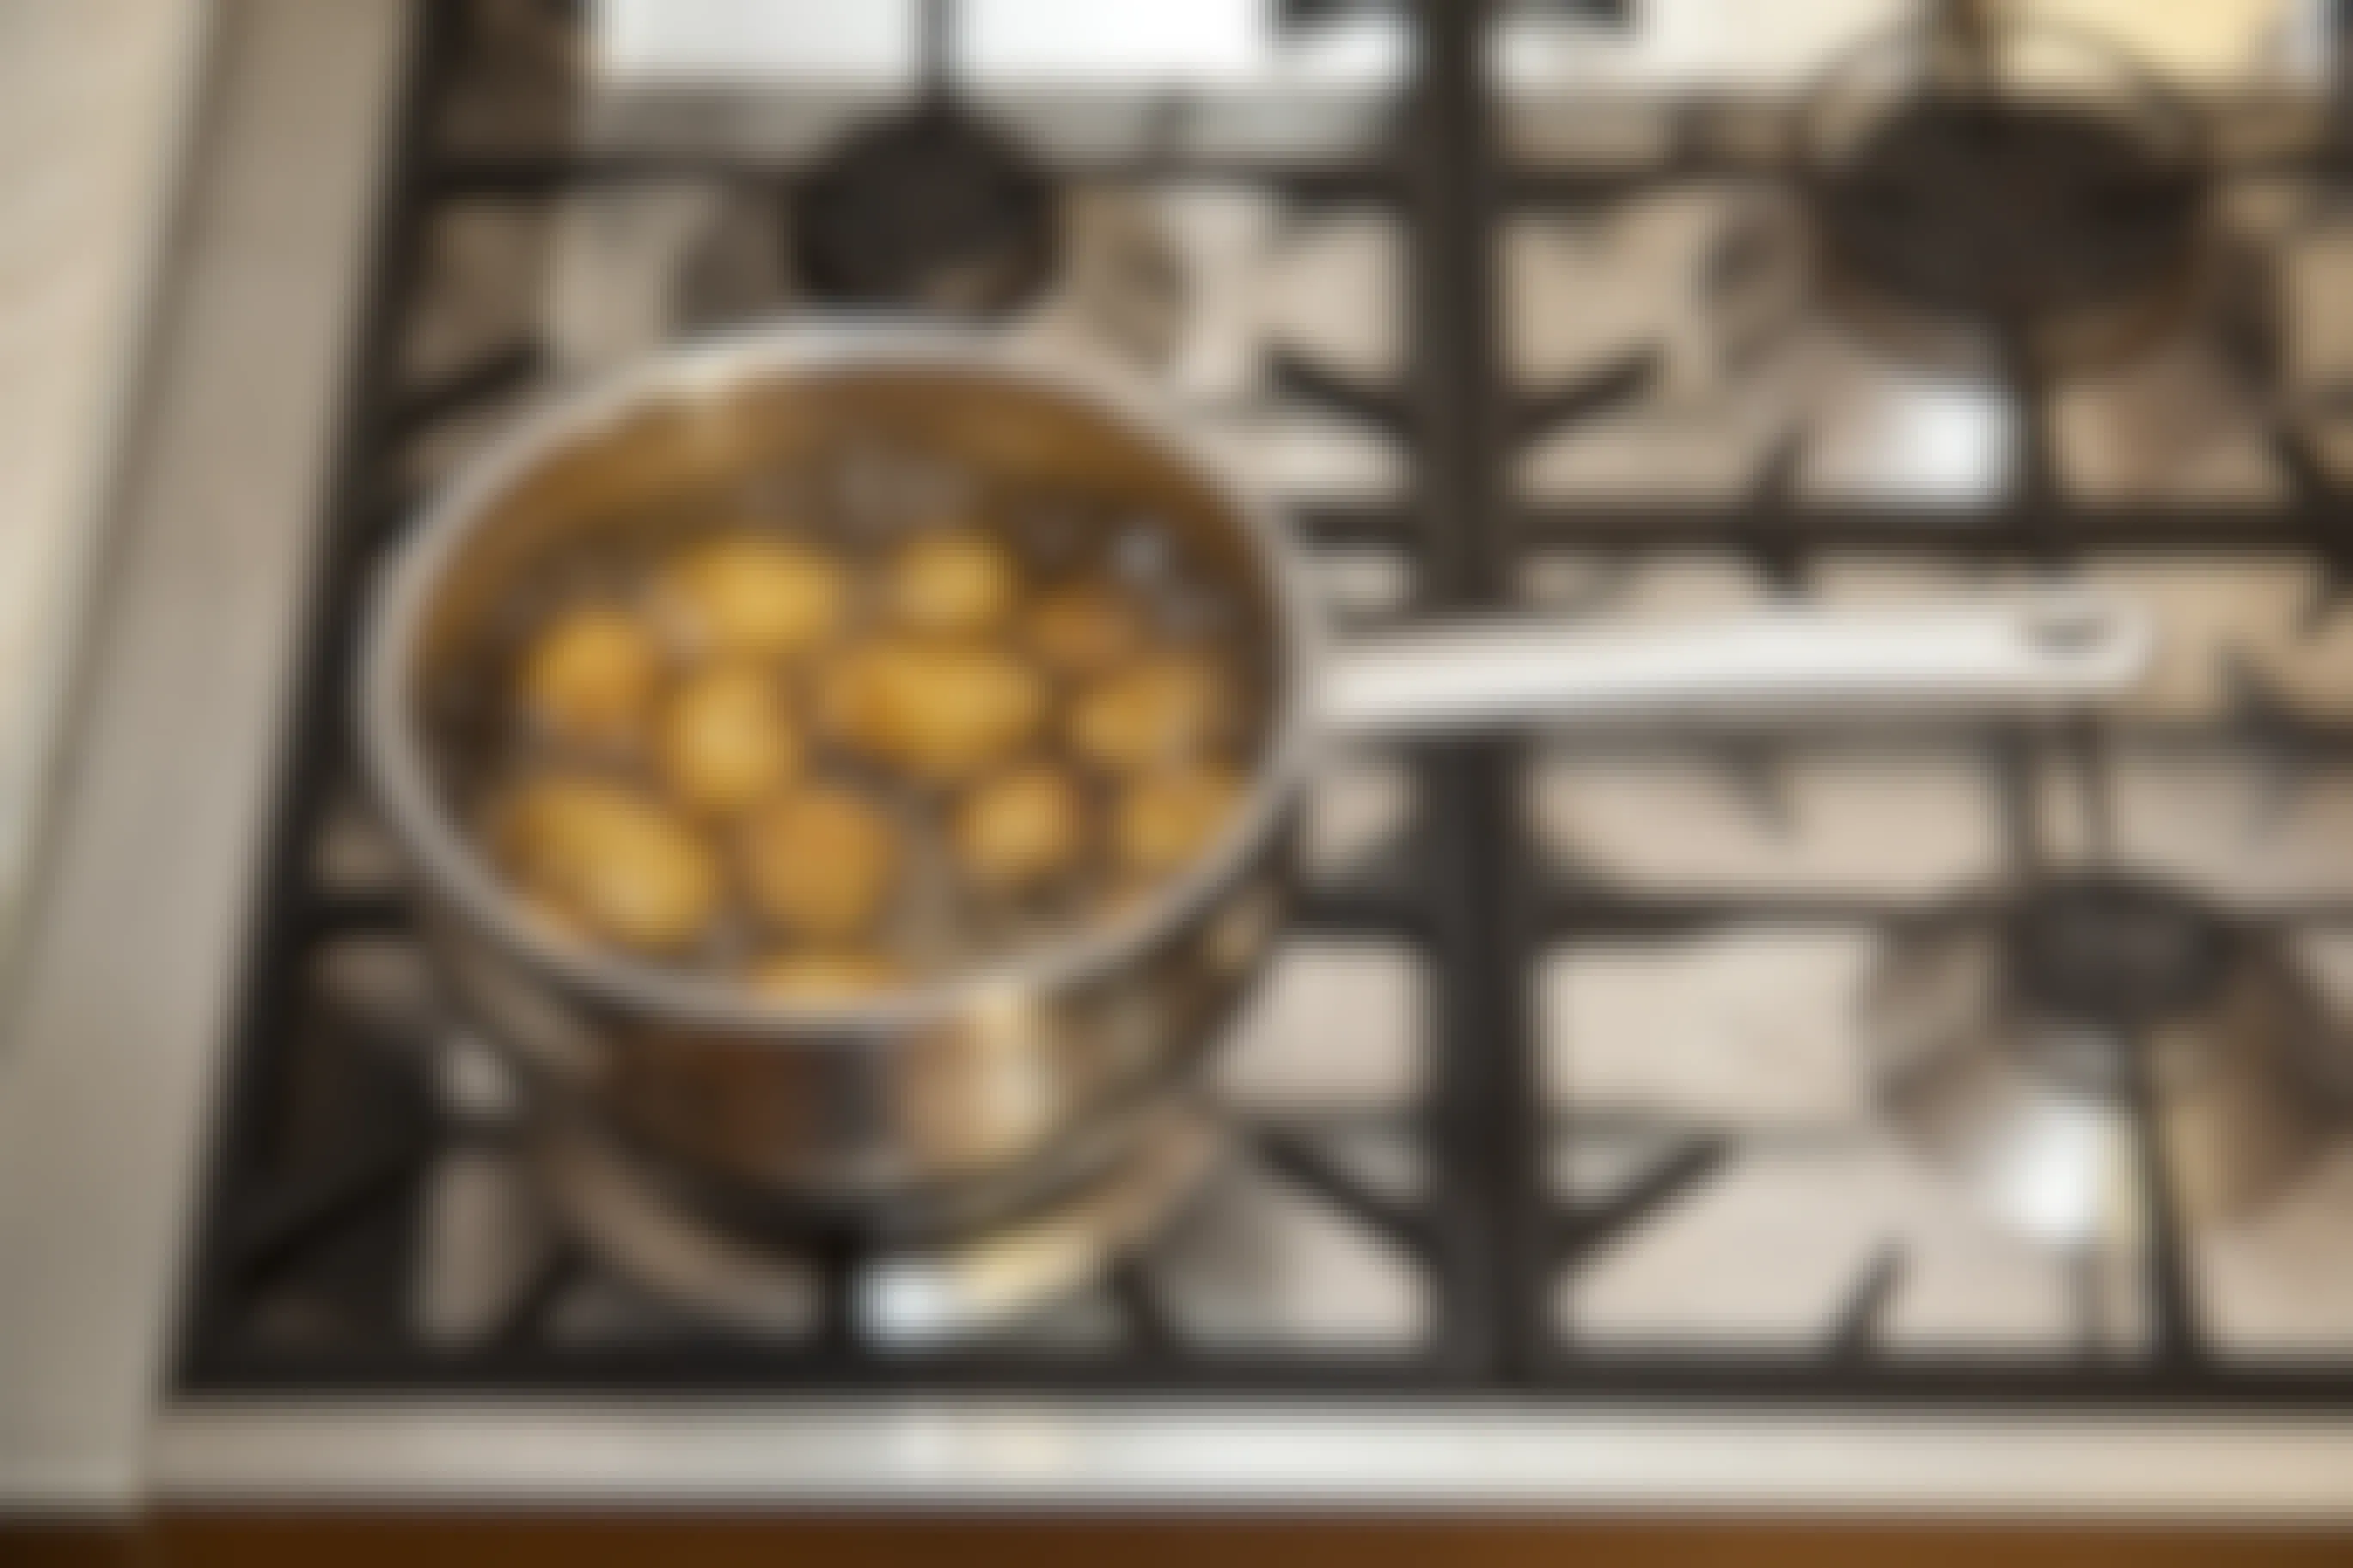 A pot of potatoes boiling on a stove.